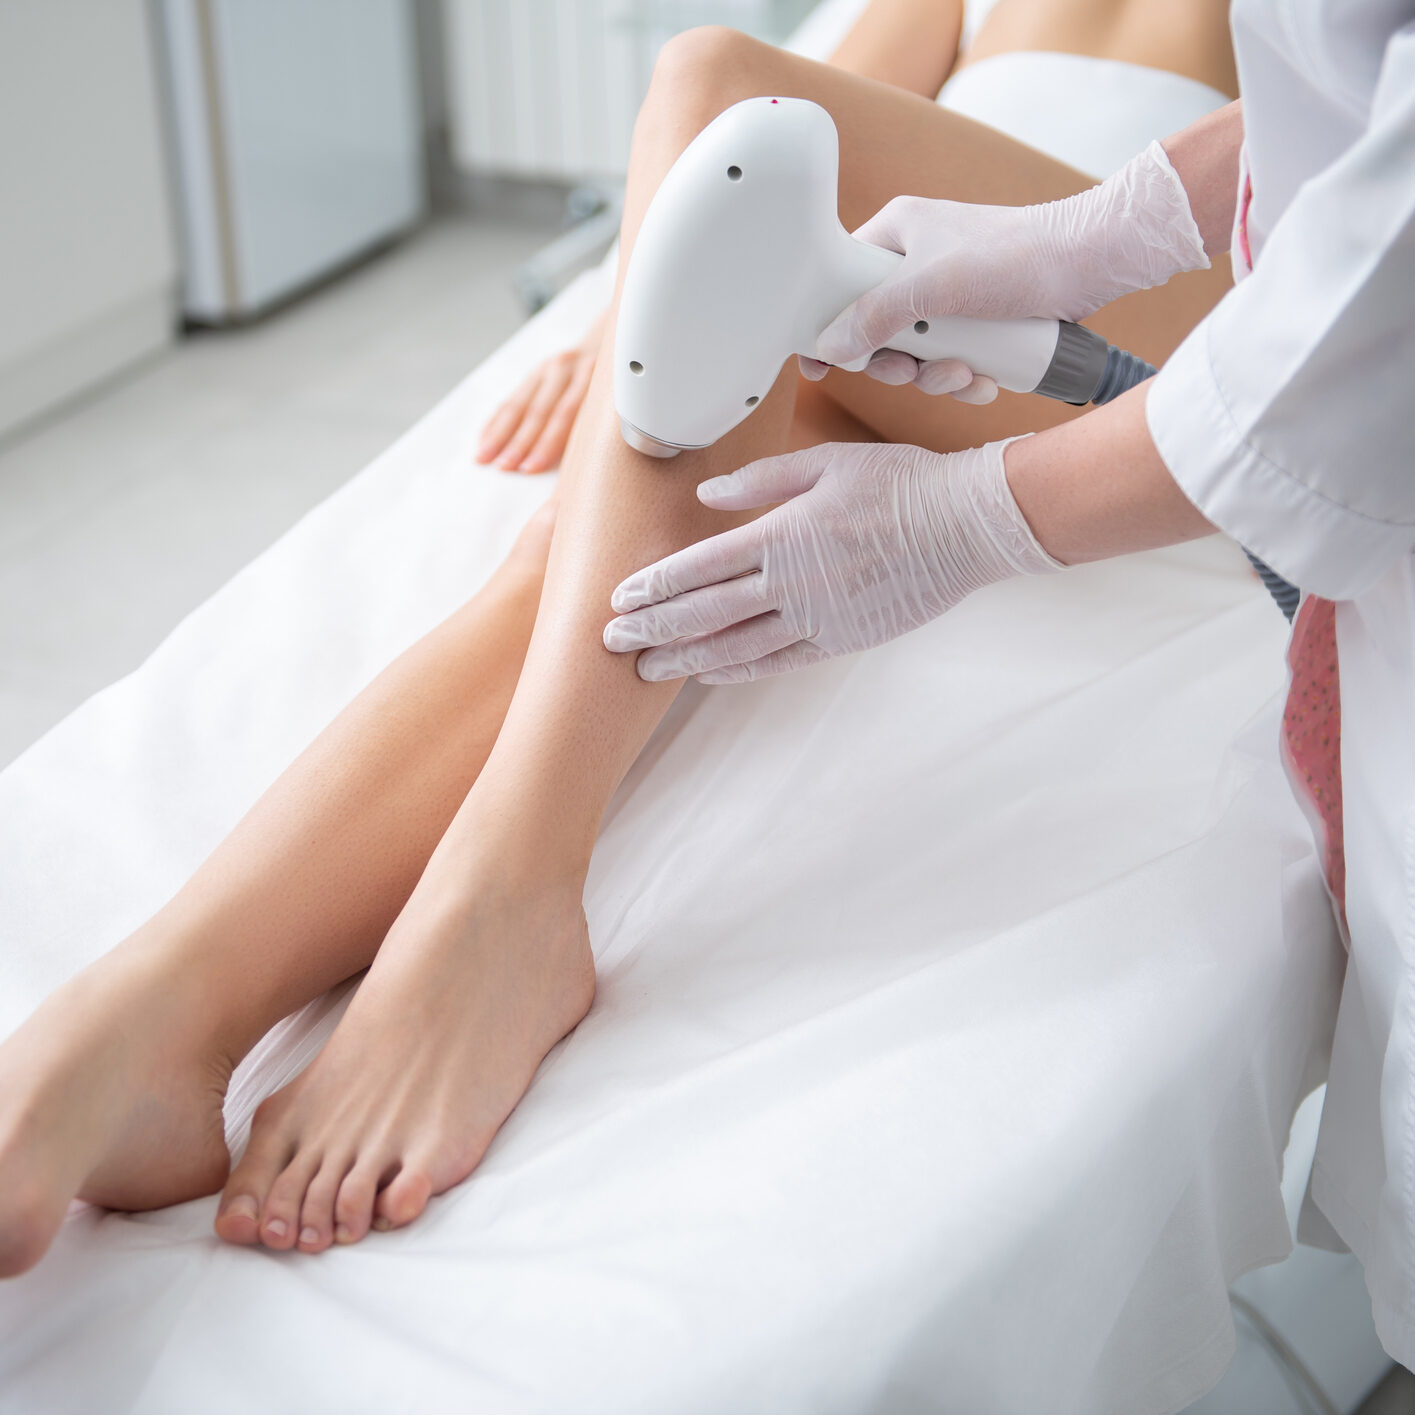 Aesthetic body treatment. Top angle portrait of young slender woman having professional laser hair removal procedure of legs